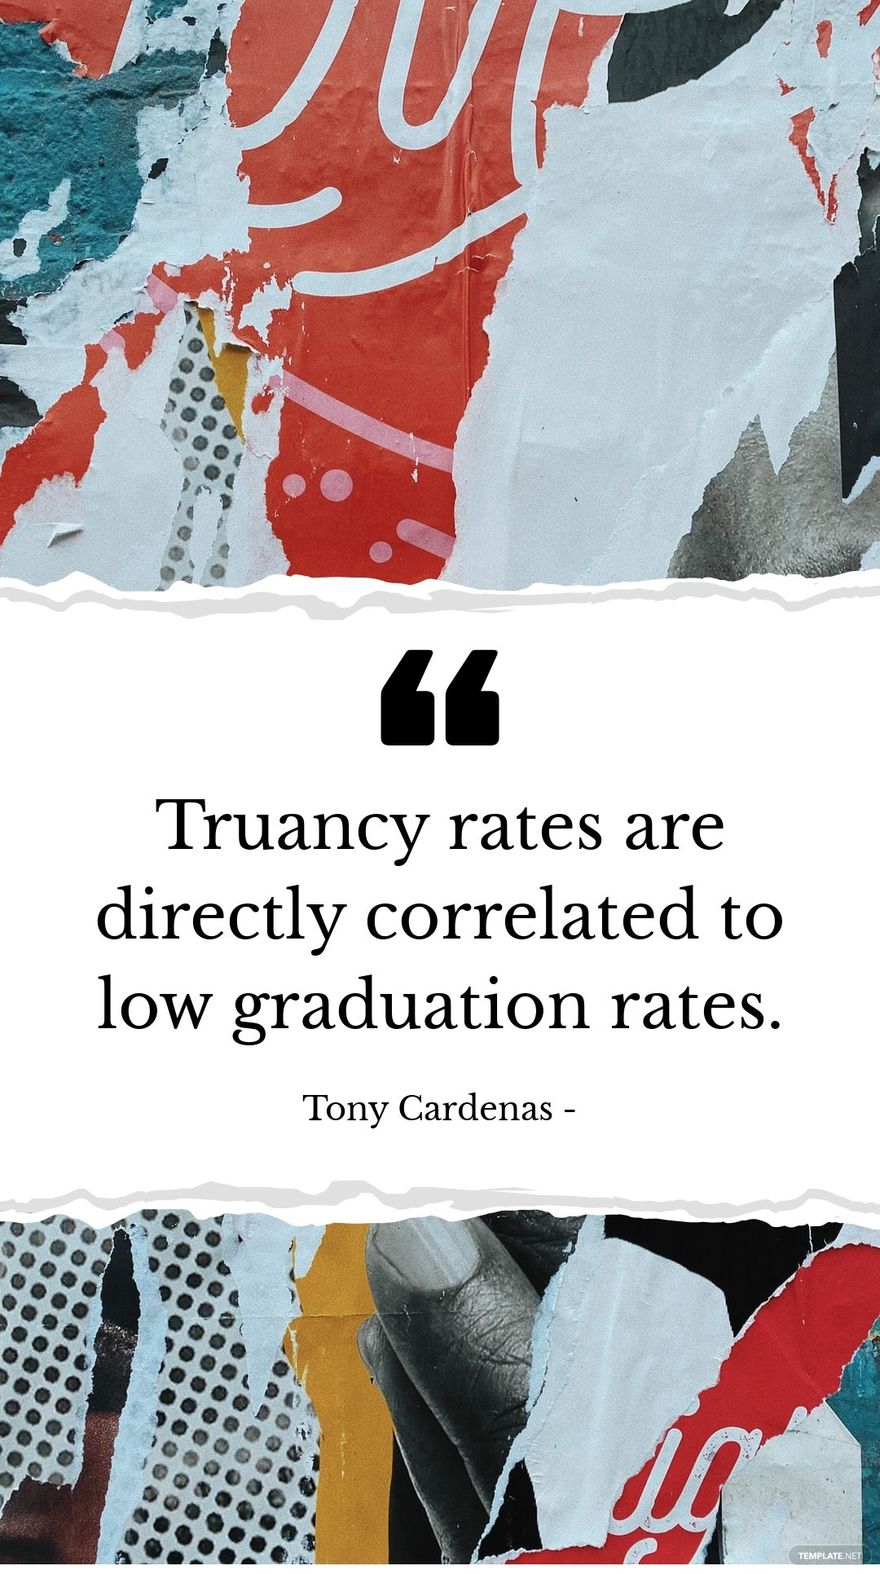 Tony Cardenas - Truancy rates are directly correlated to low graduation rates.